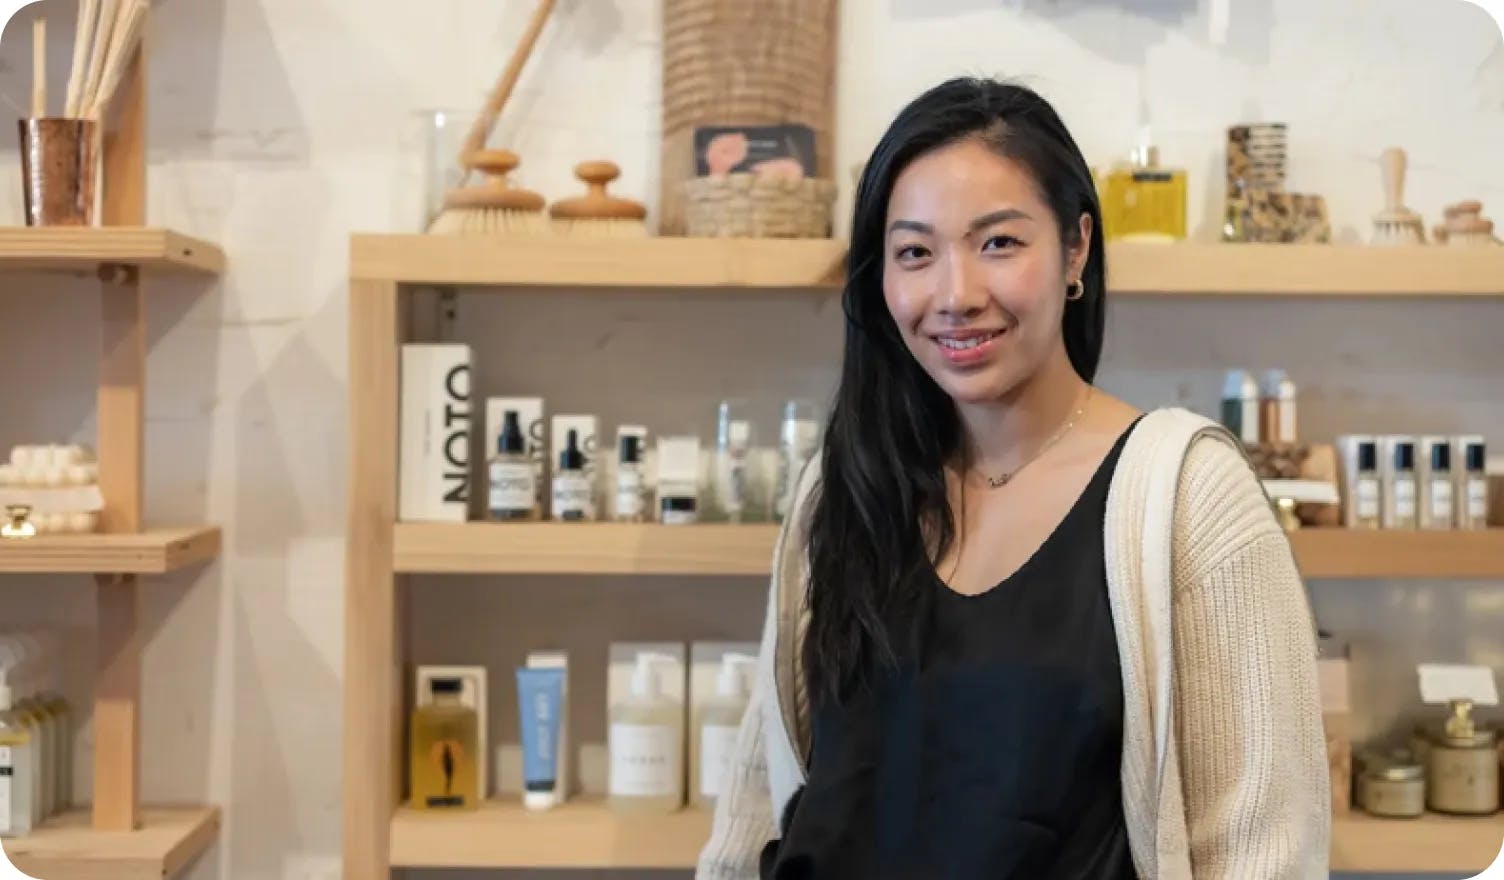 Founder Aoxue Tang with July Sky products in the background.